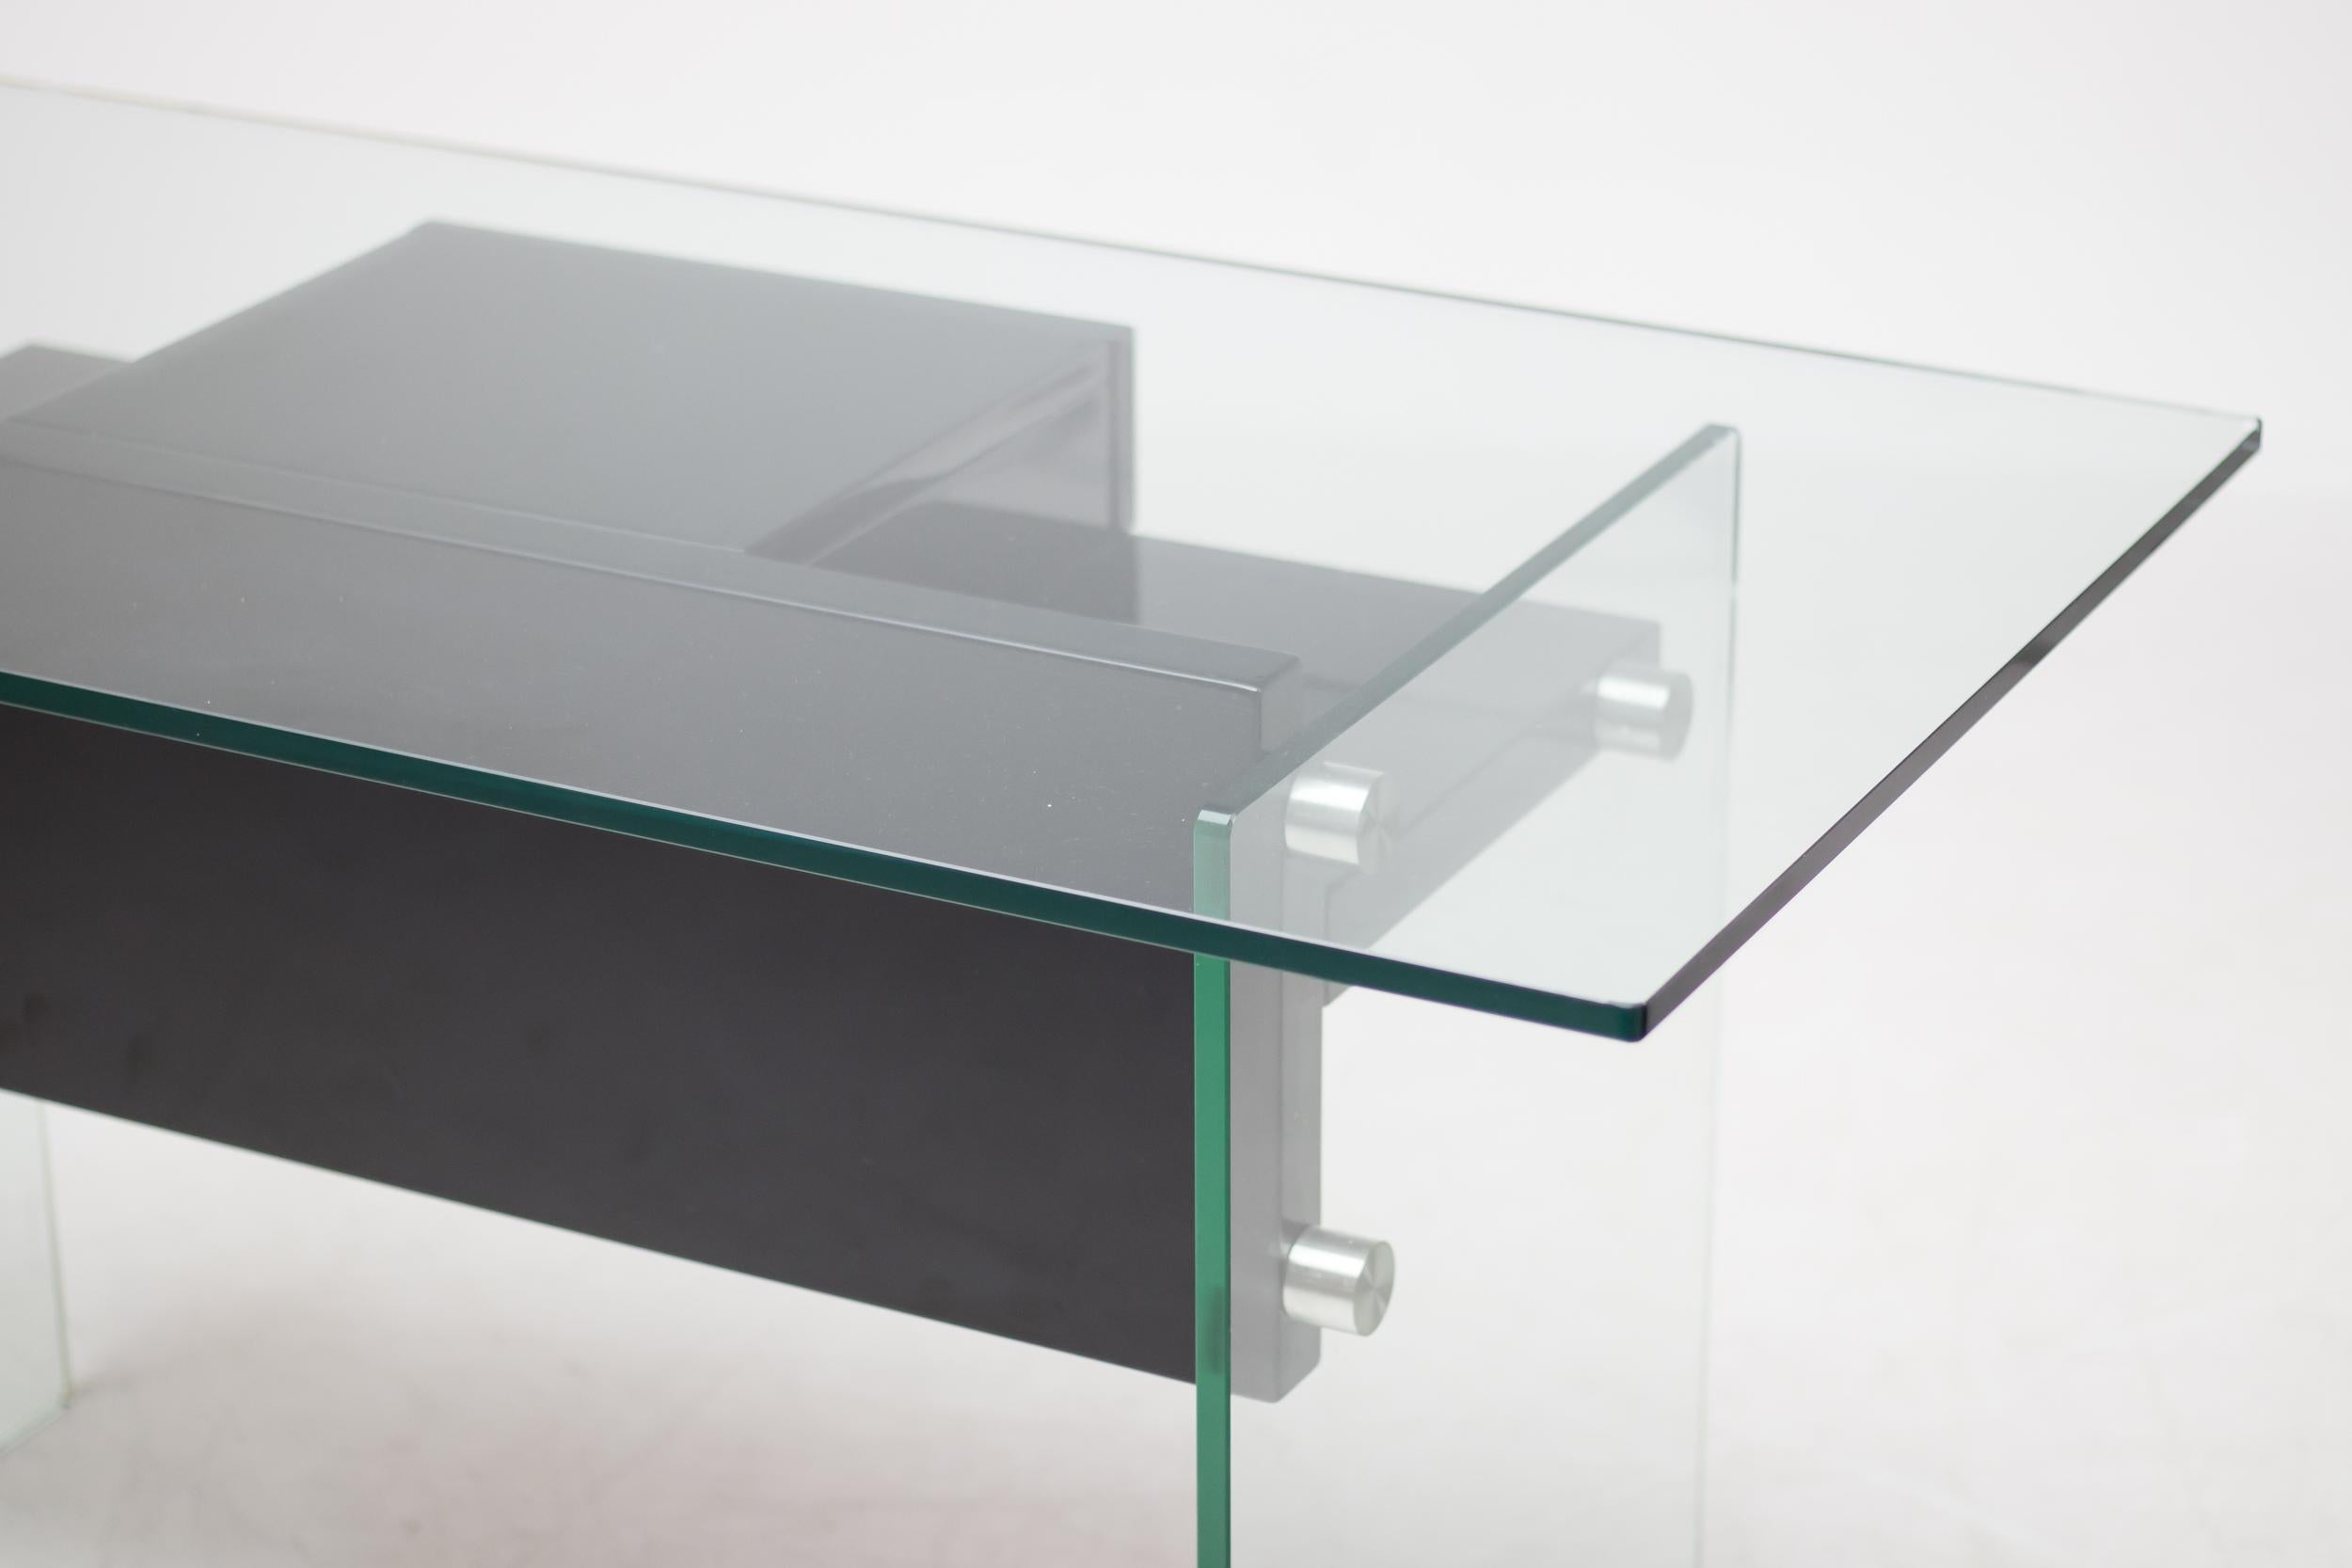 Stainless steel, Japanese gloss lacquered wood and glass desk, Xavier Marbeau designed similar desks in the 1970s.
This elegant design is stripped to the bare essentials; a workspace and a drawer.
What more could you actually really need these